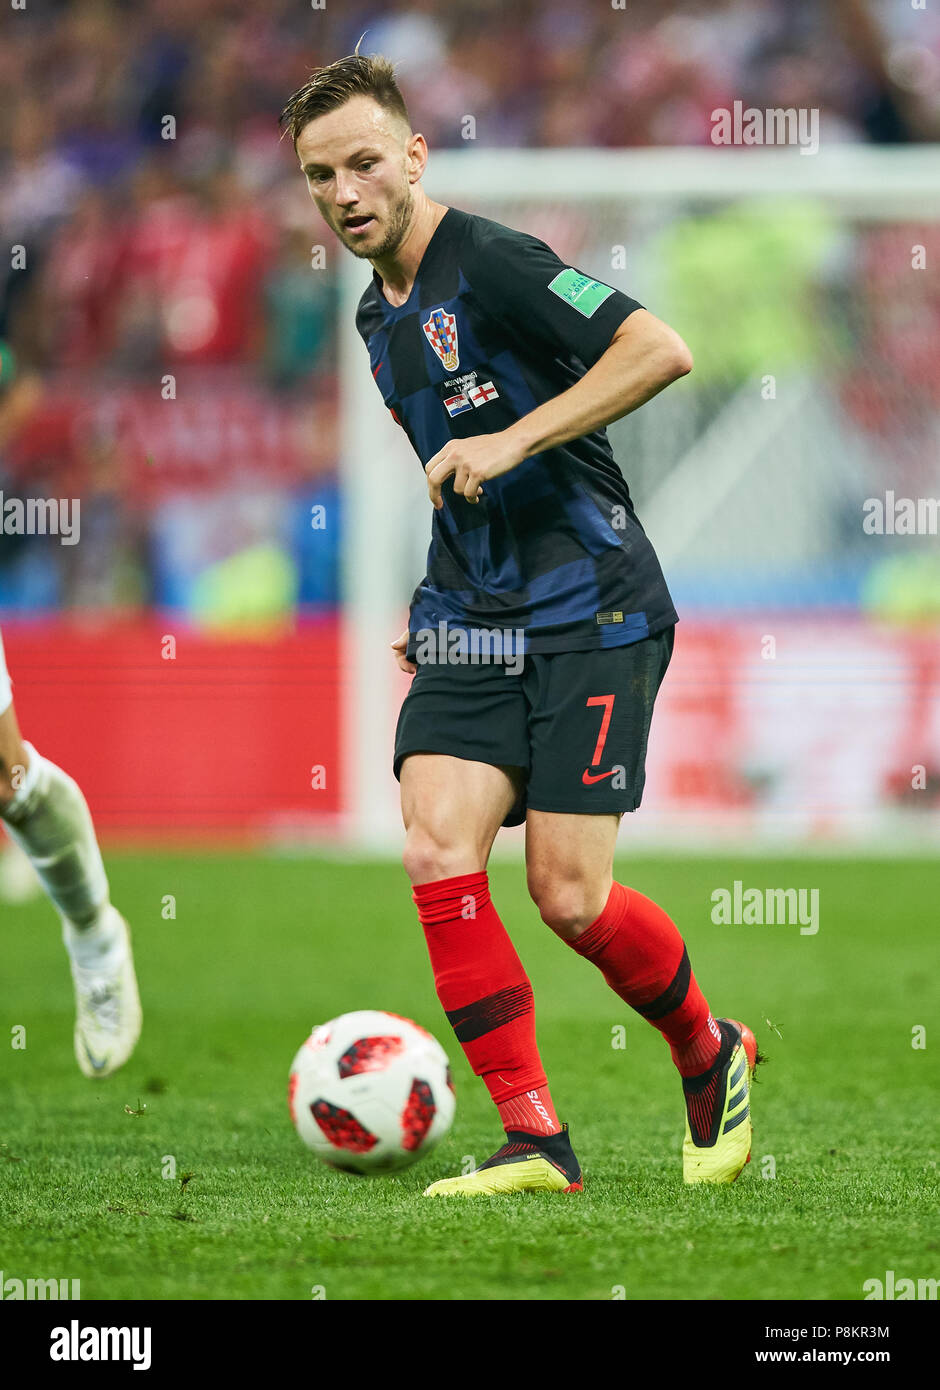 England - Croatia, Soccer, Moscow, July 11, 2018 Ivan RAKITIC, Croatia Nr.7  drives, controls the ball, action, full-size, Single action with ball, full body, whole figure, cutout, single shots, ball treatment, pick-up, header, cut out,  ENGLAND  - CROATIA 1-2 Football FIFA WORLD CUP 2018 RUSSIA, Semifinal, Season 2018/2019,  July 11, 2018 in Moscow, Russia. © Peter Schatz / Alamy Live News Stock Photo